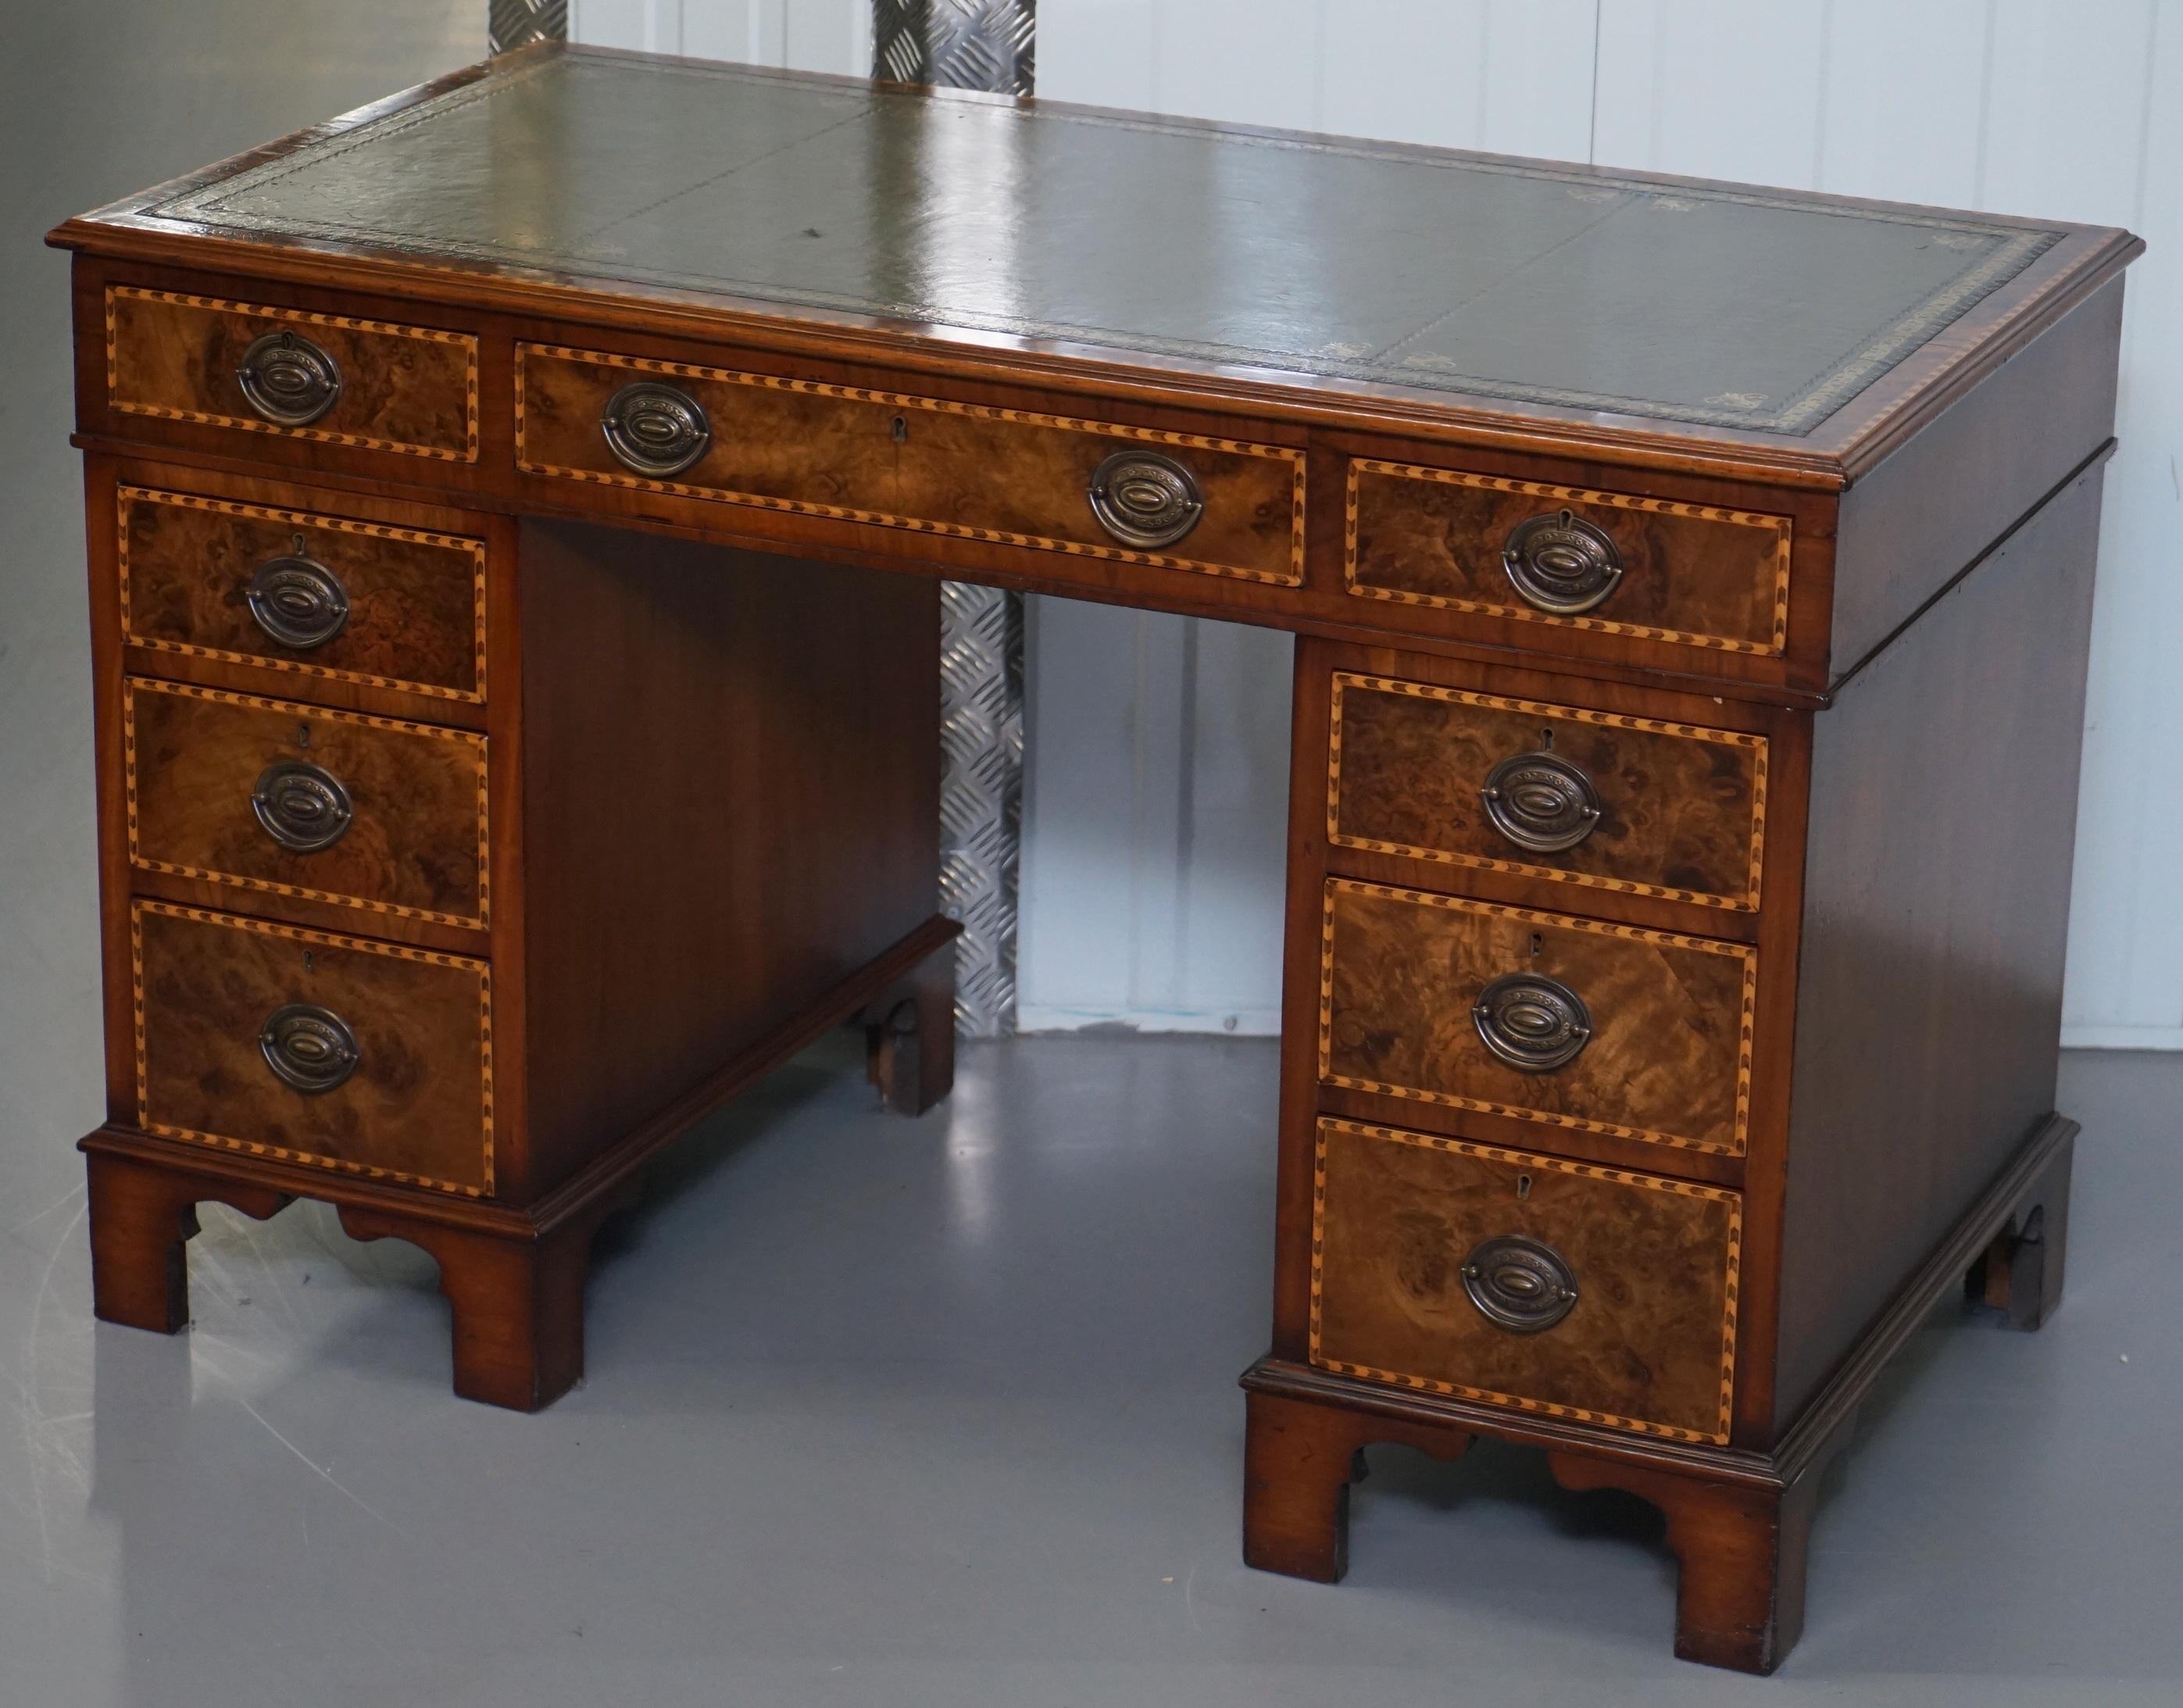 Hand-Crafted Rare Victorian Burr Oak & Walnut Merryweather London 1885 Stamped Desk, Leather